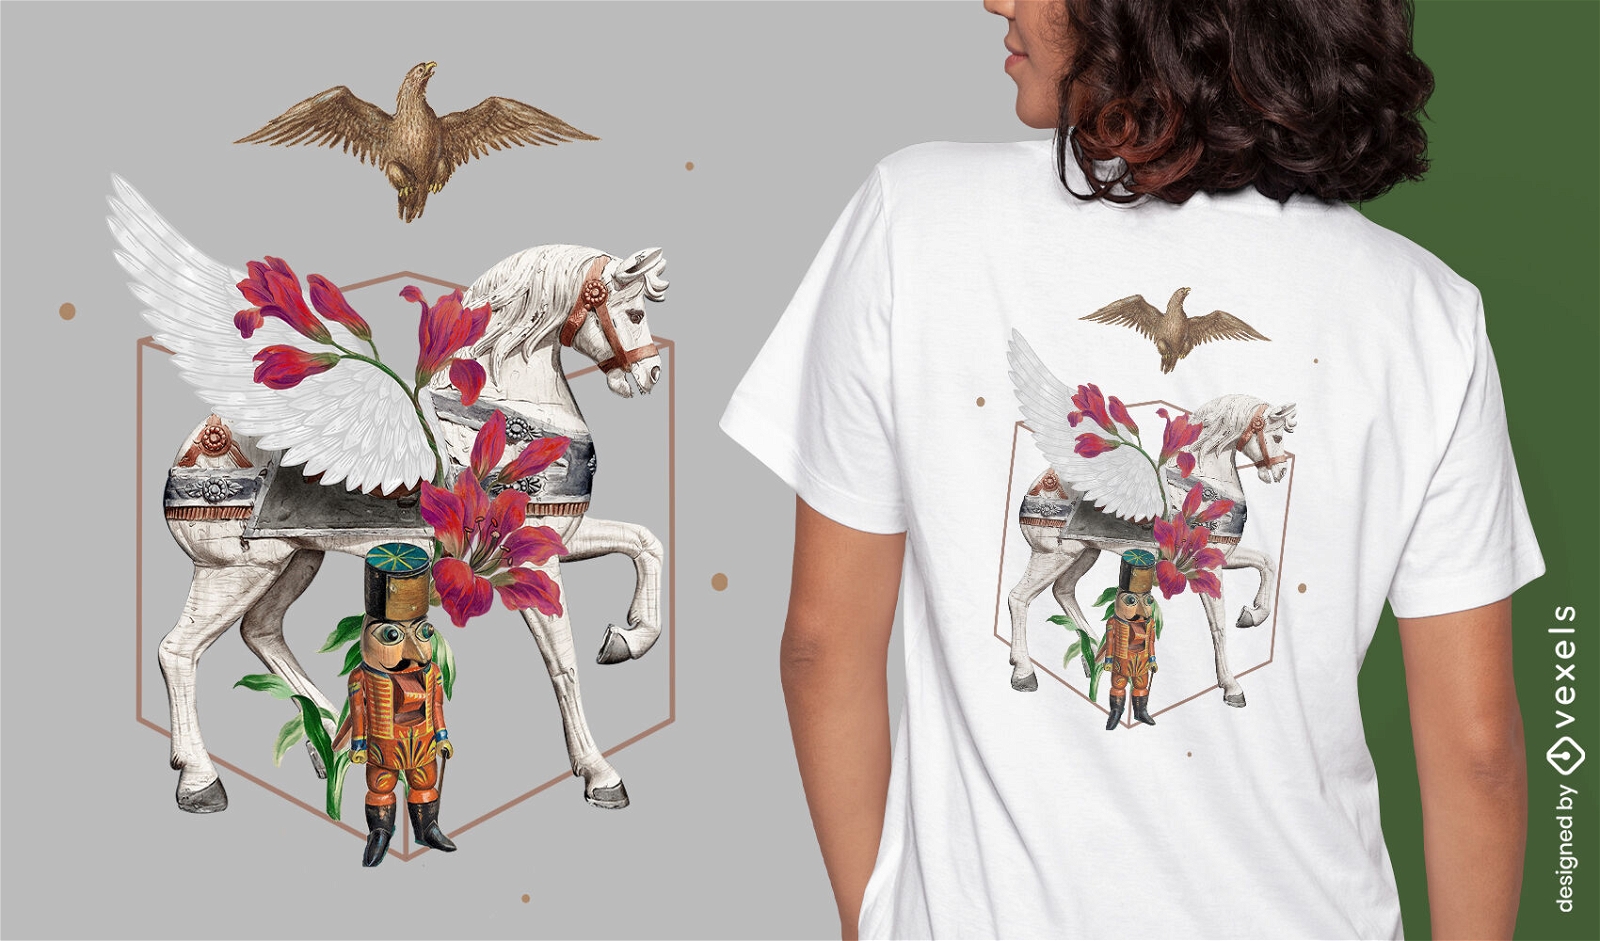 Horse and flowers absurd nature t-shirt design